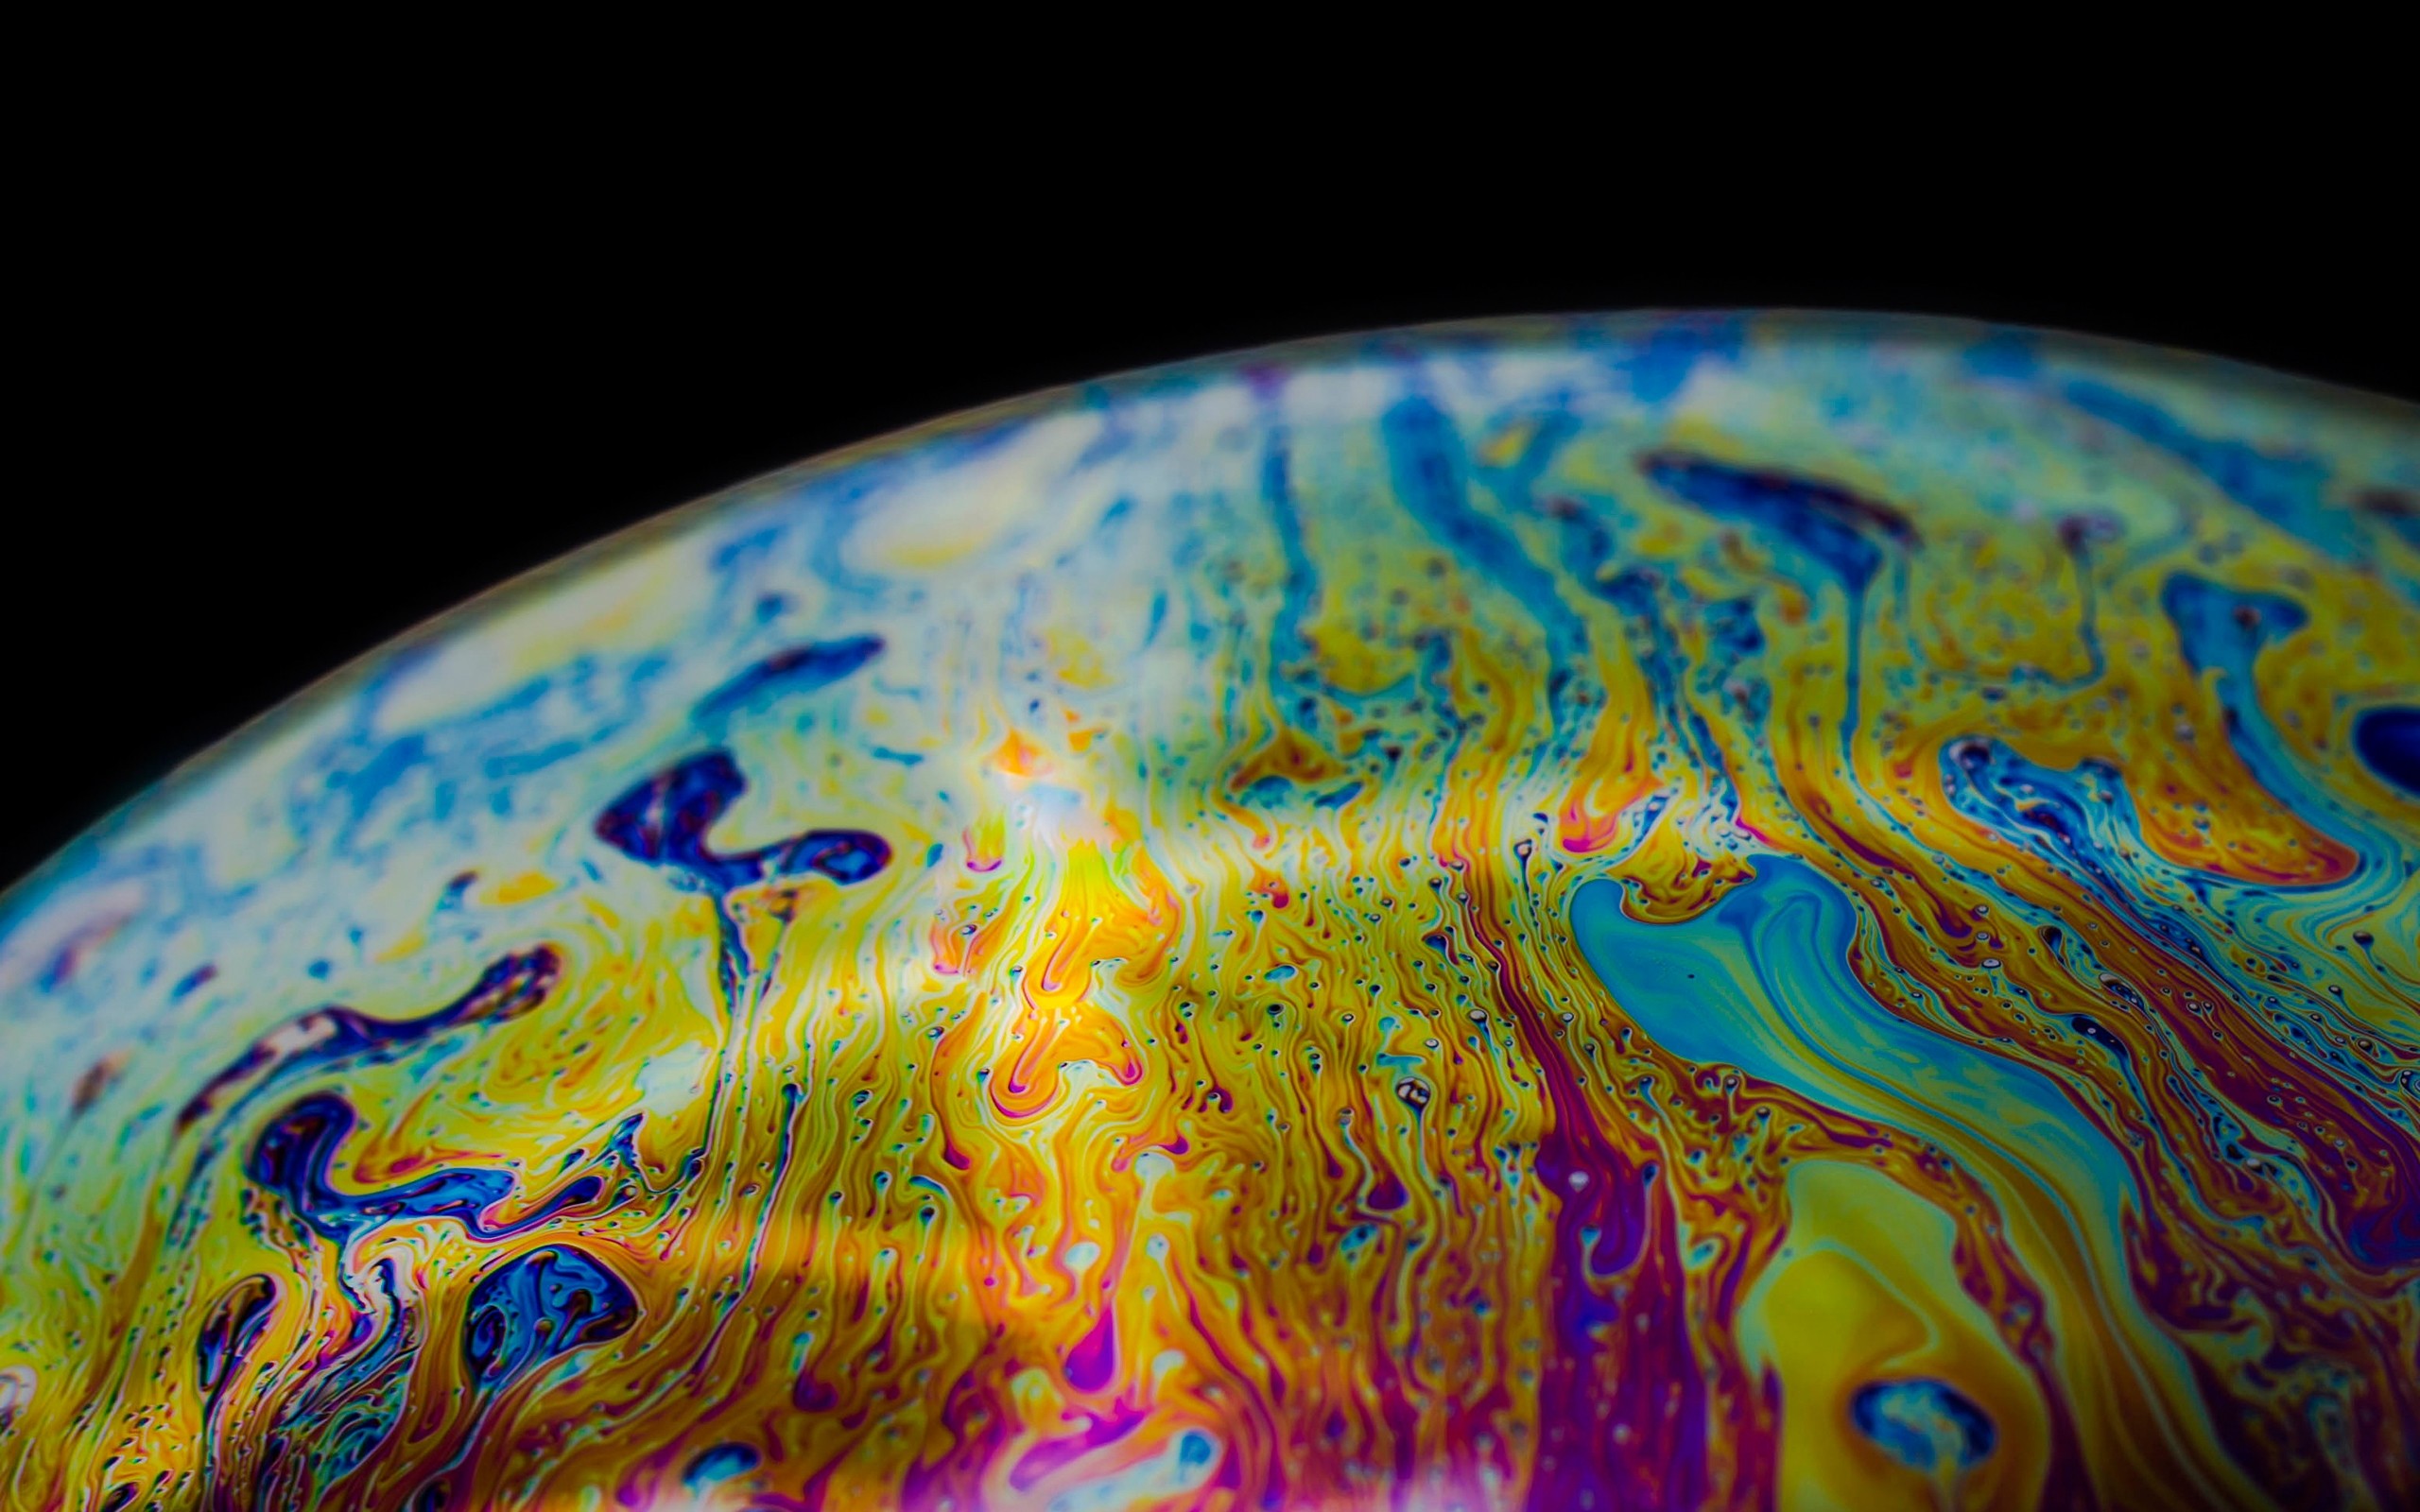 General 2560x1600 soap bubbles macro abstract colorful photography black background